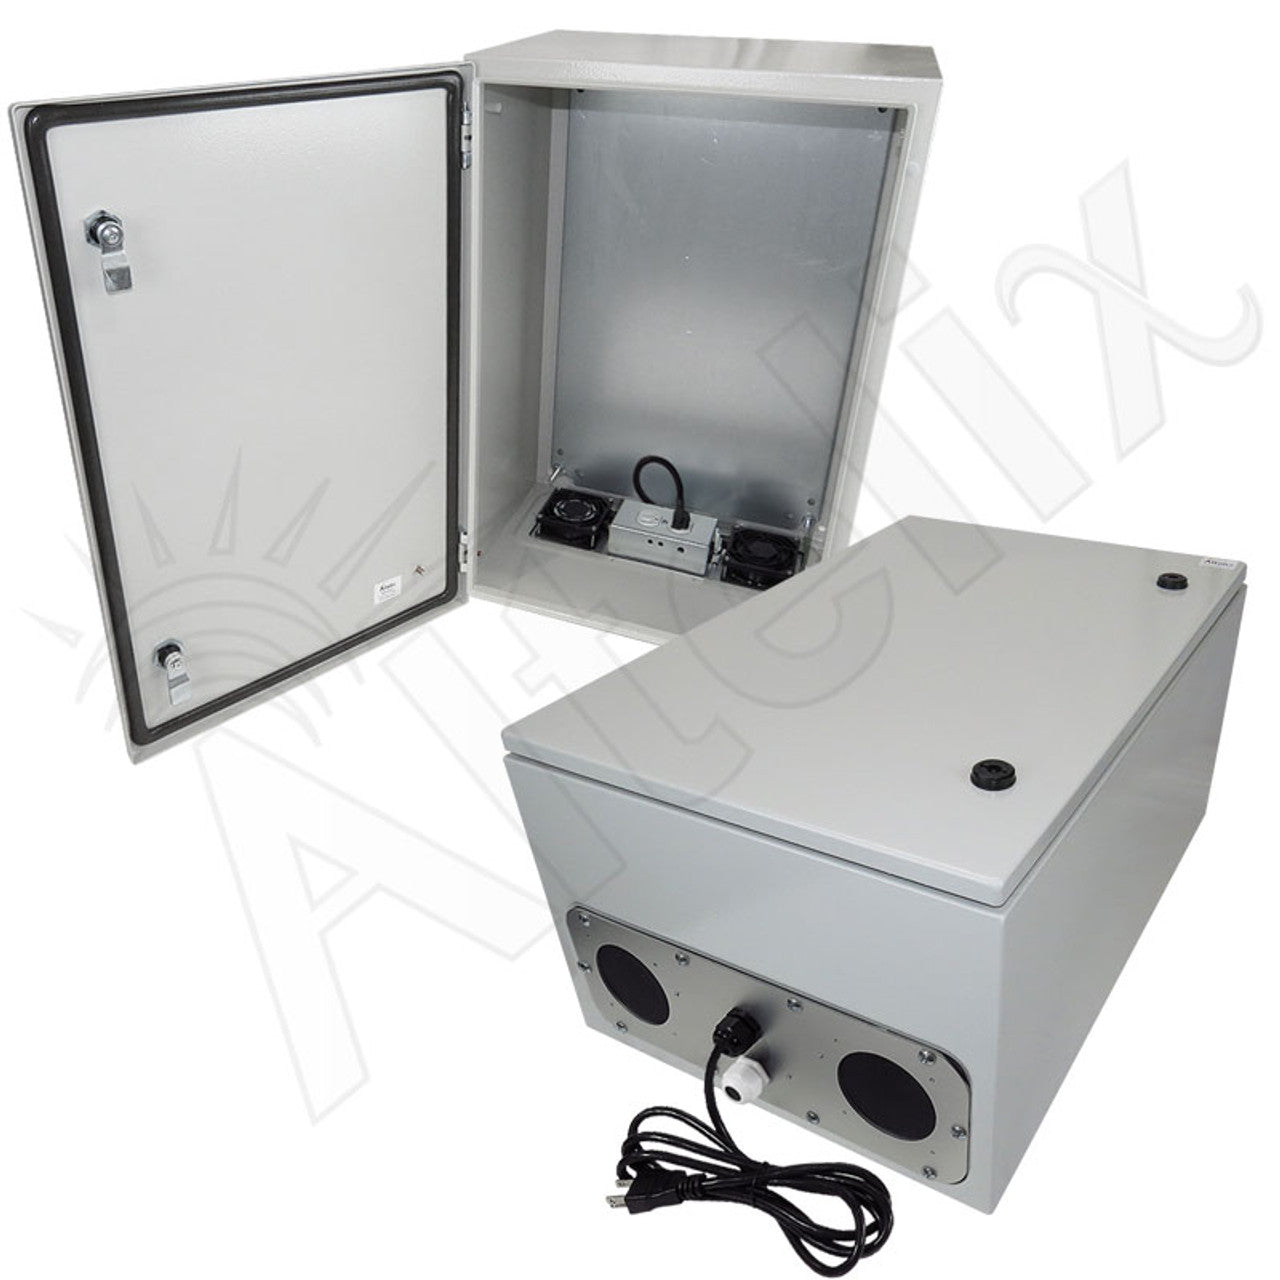 Altelix Steel Heated Weatherproof NEMA Enclosure with Dual Cooling Fans, 200W Heater, 120 VAC Outlets and Power Cord-4